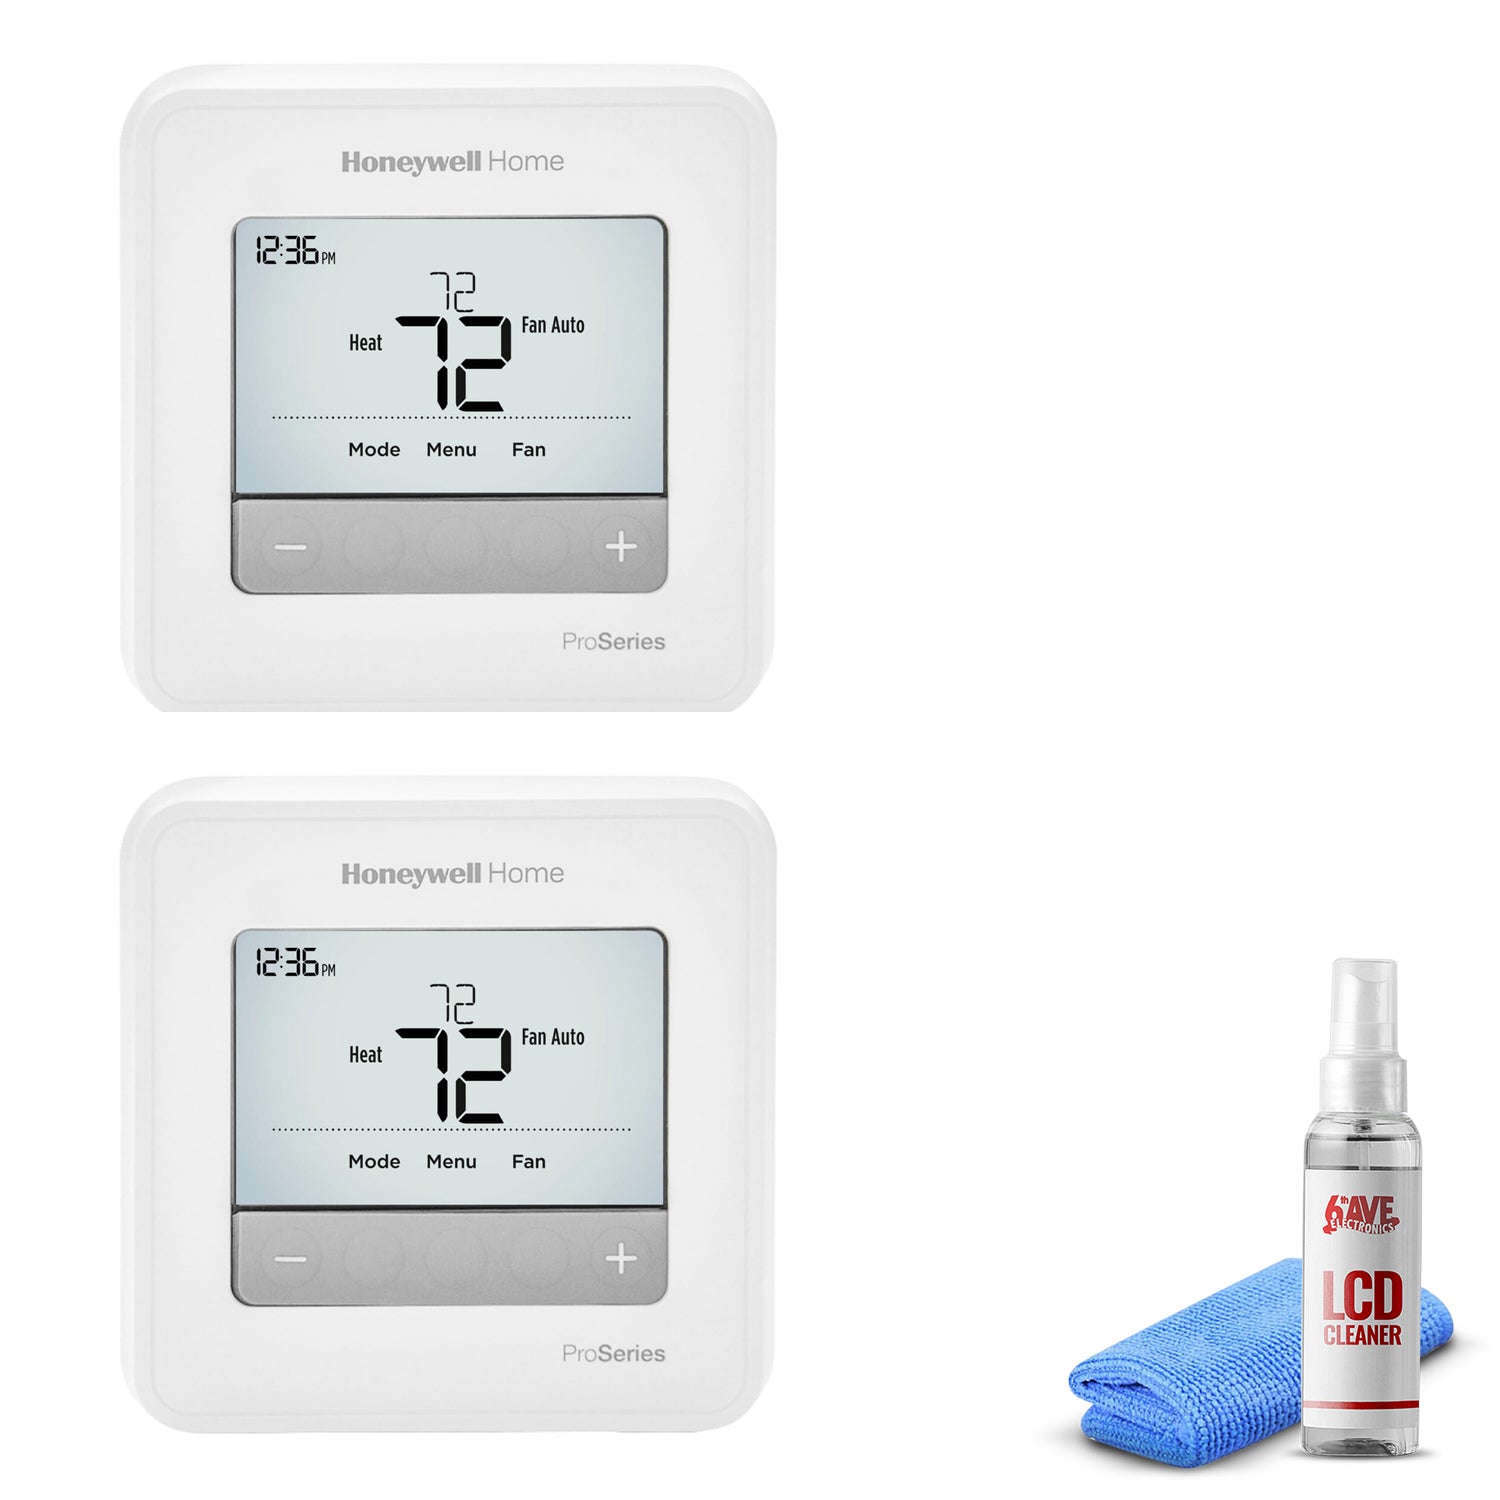 2-Pack Honeywell T4 Pro Series Programmable Thermostat TH4110U2005 + LCD Cleaner Bundle